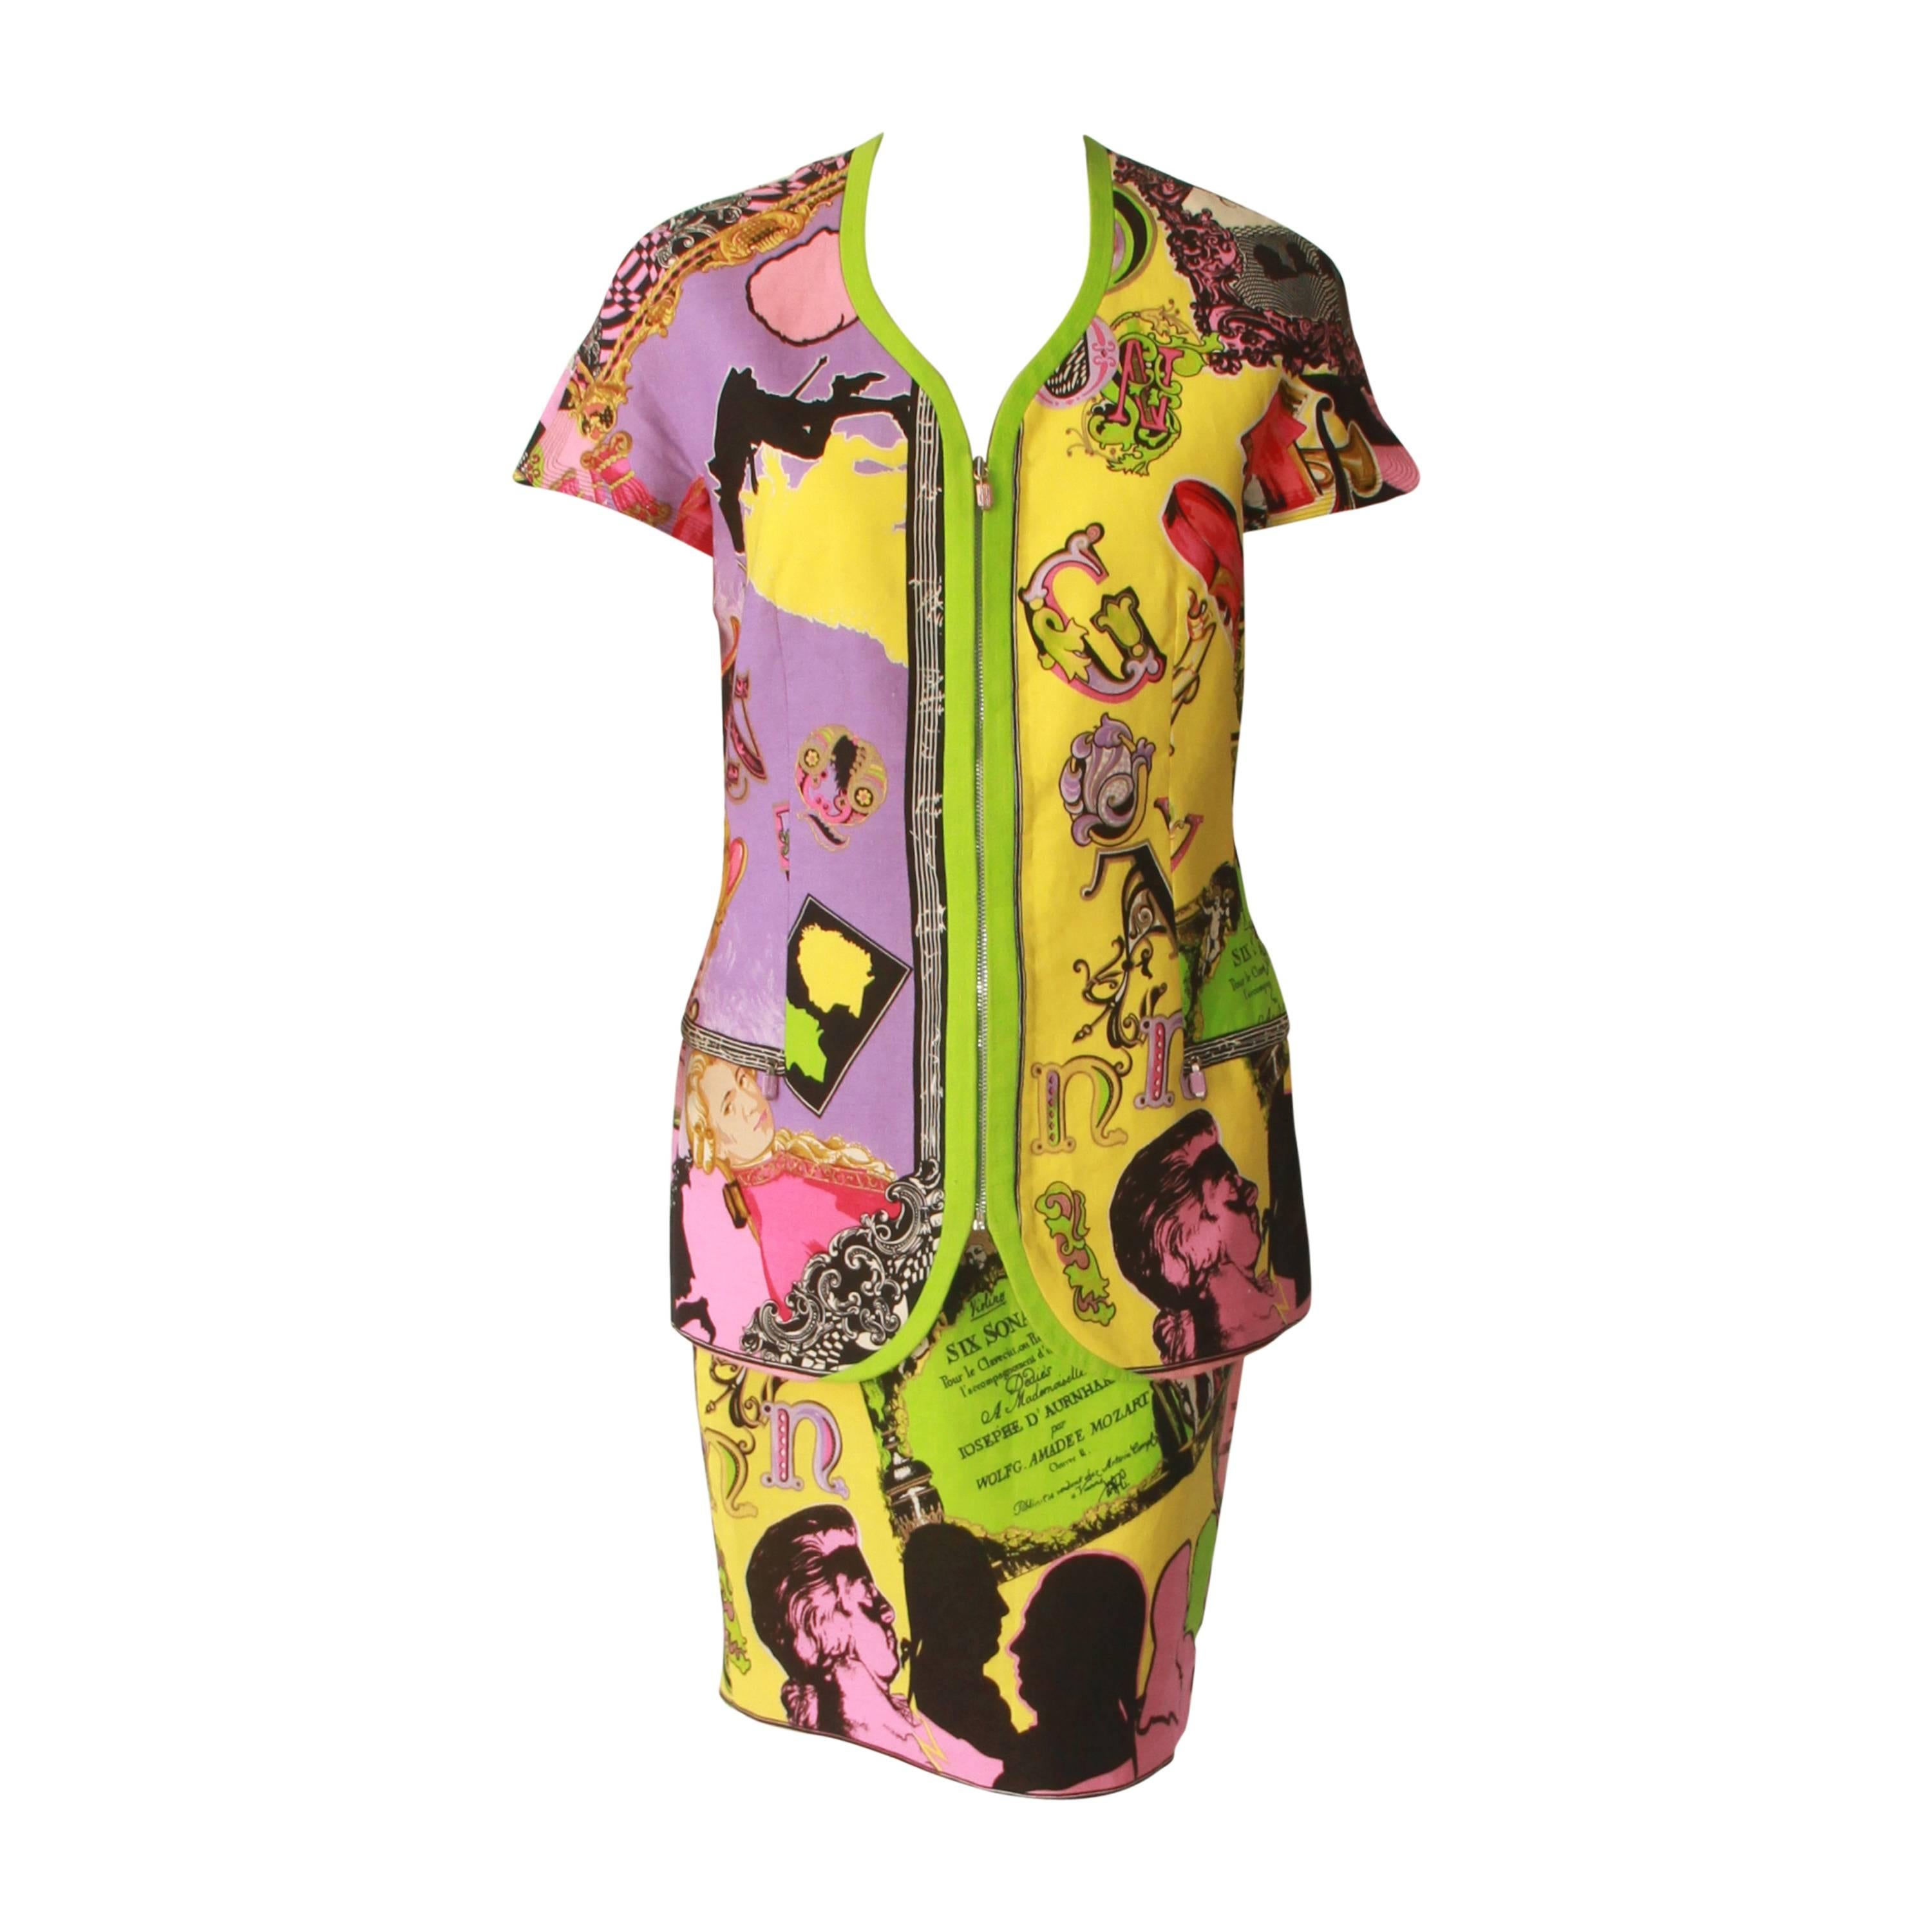 Gianni Versace Printed Suit Spring 1992 For Sale